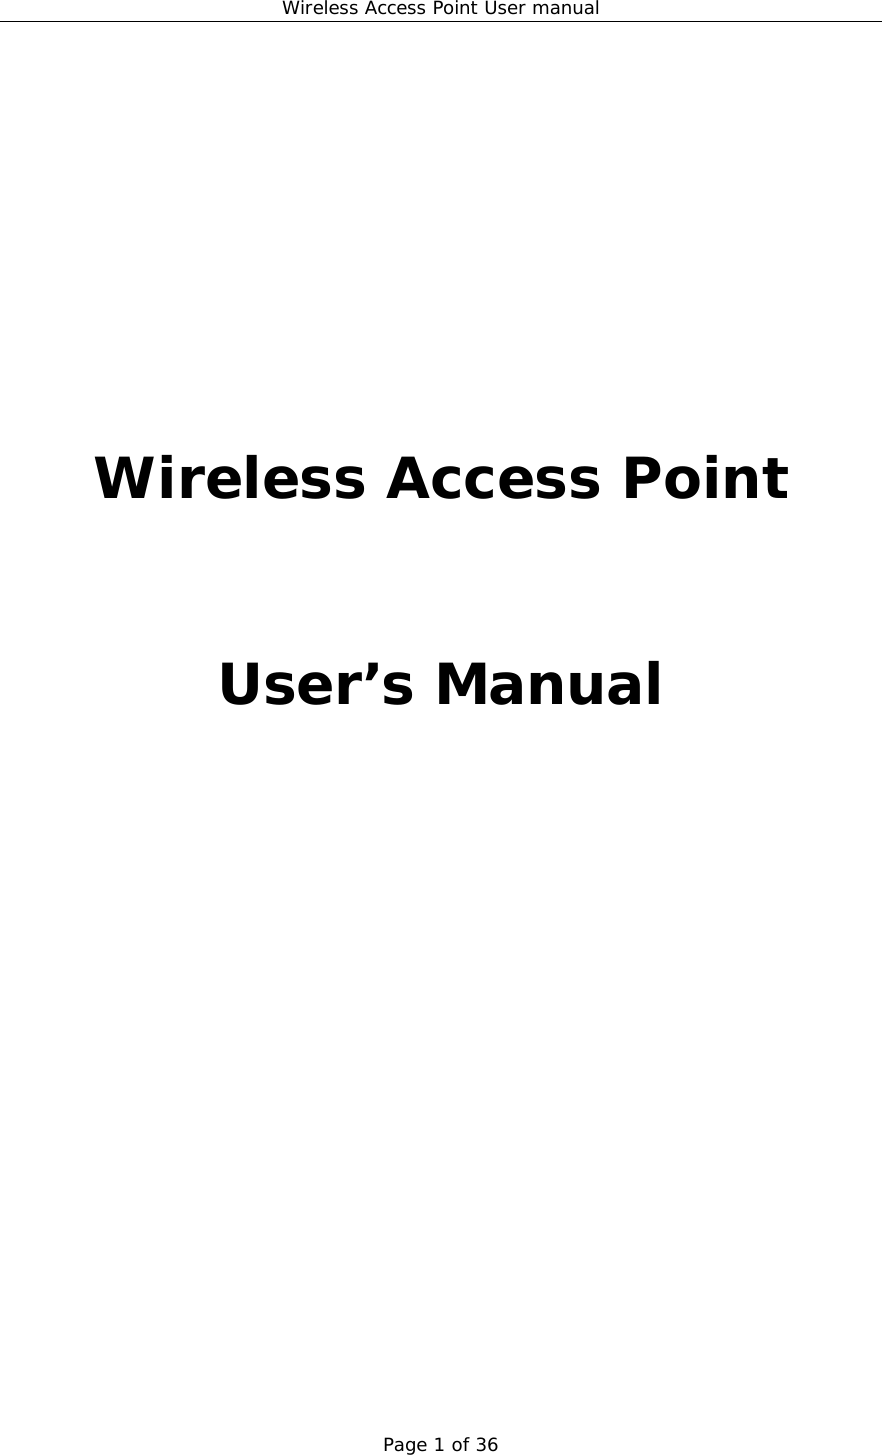 Wireless Access Point User manual Page 1 of 36       Wireless Access Point   User’s Manual                 